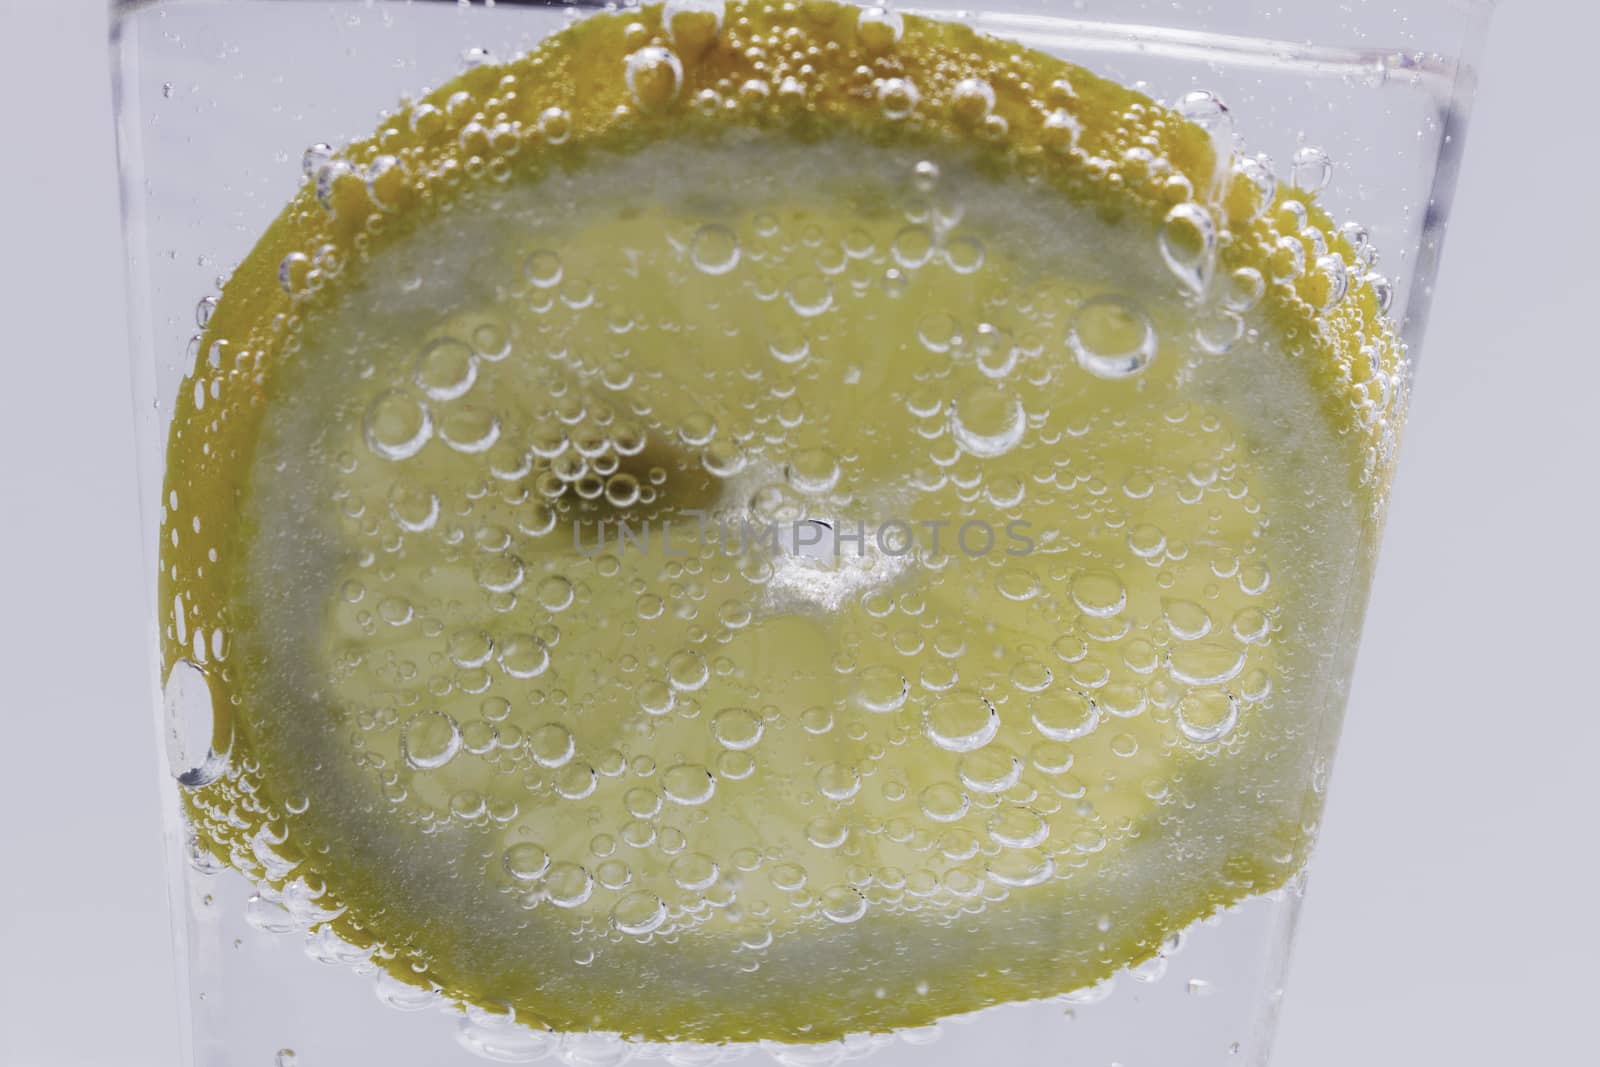 Lemon Slice In Water With Air Bubbles